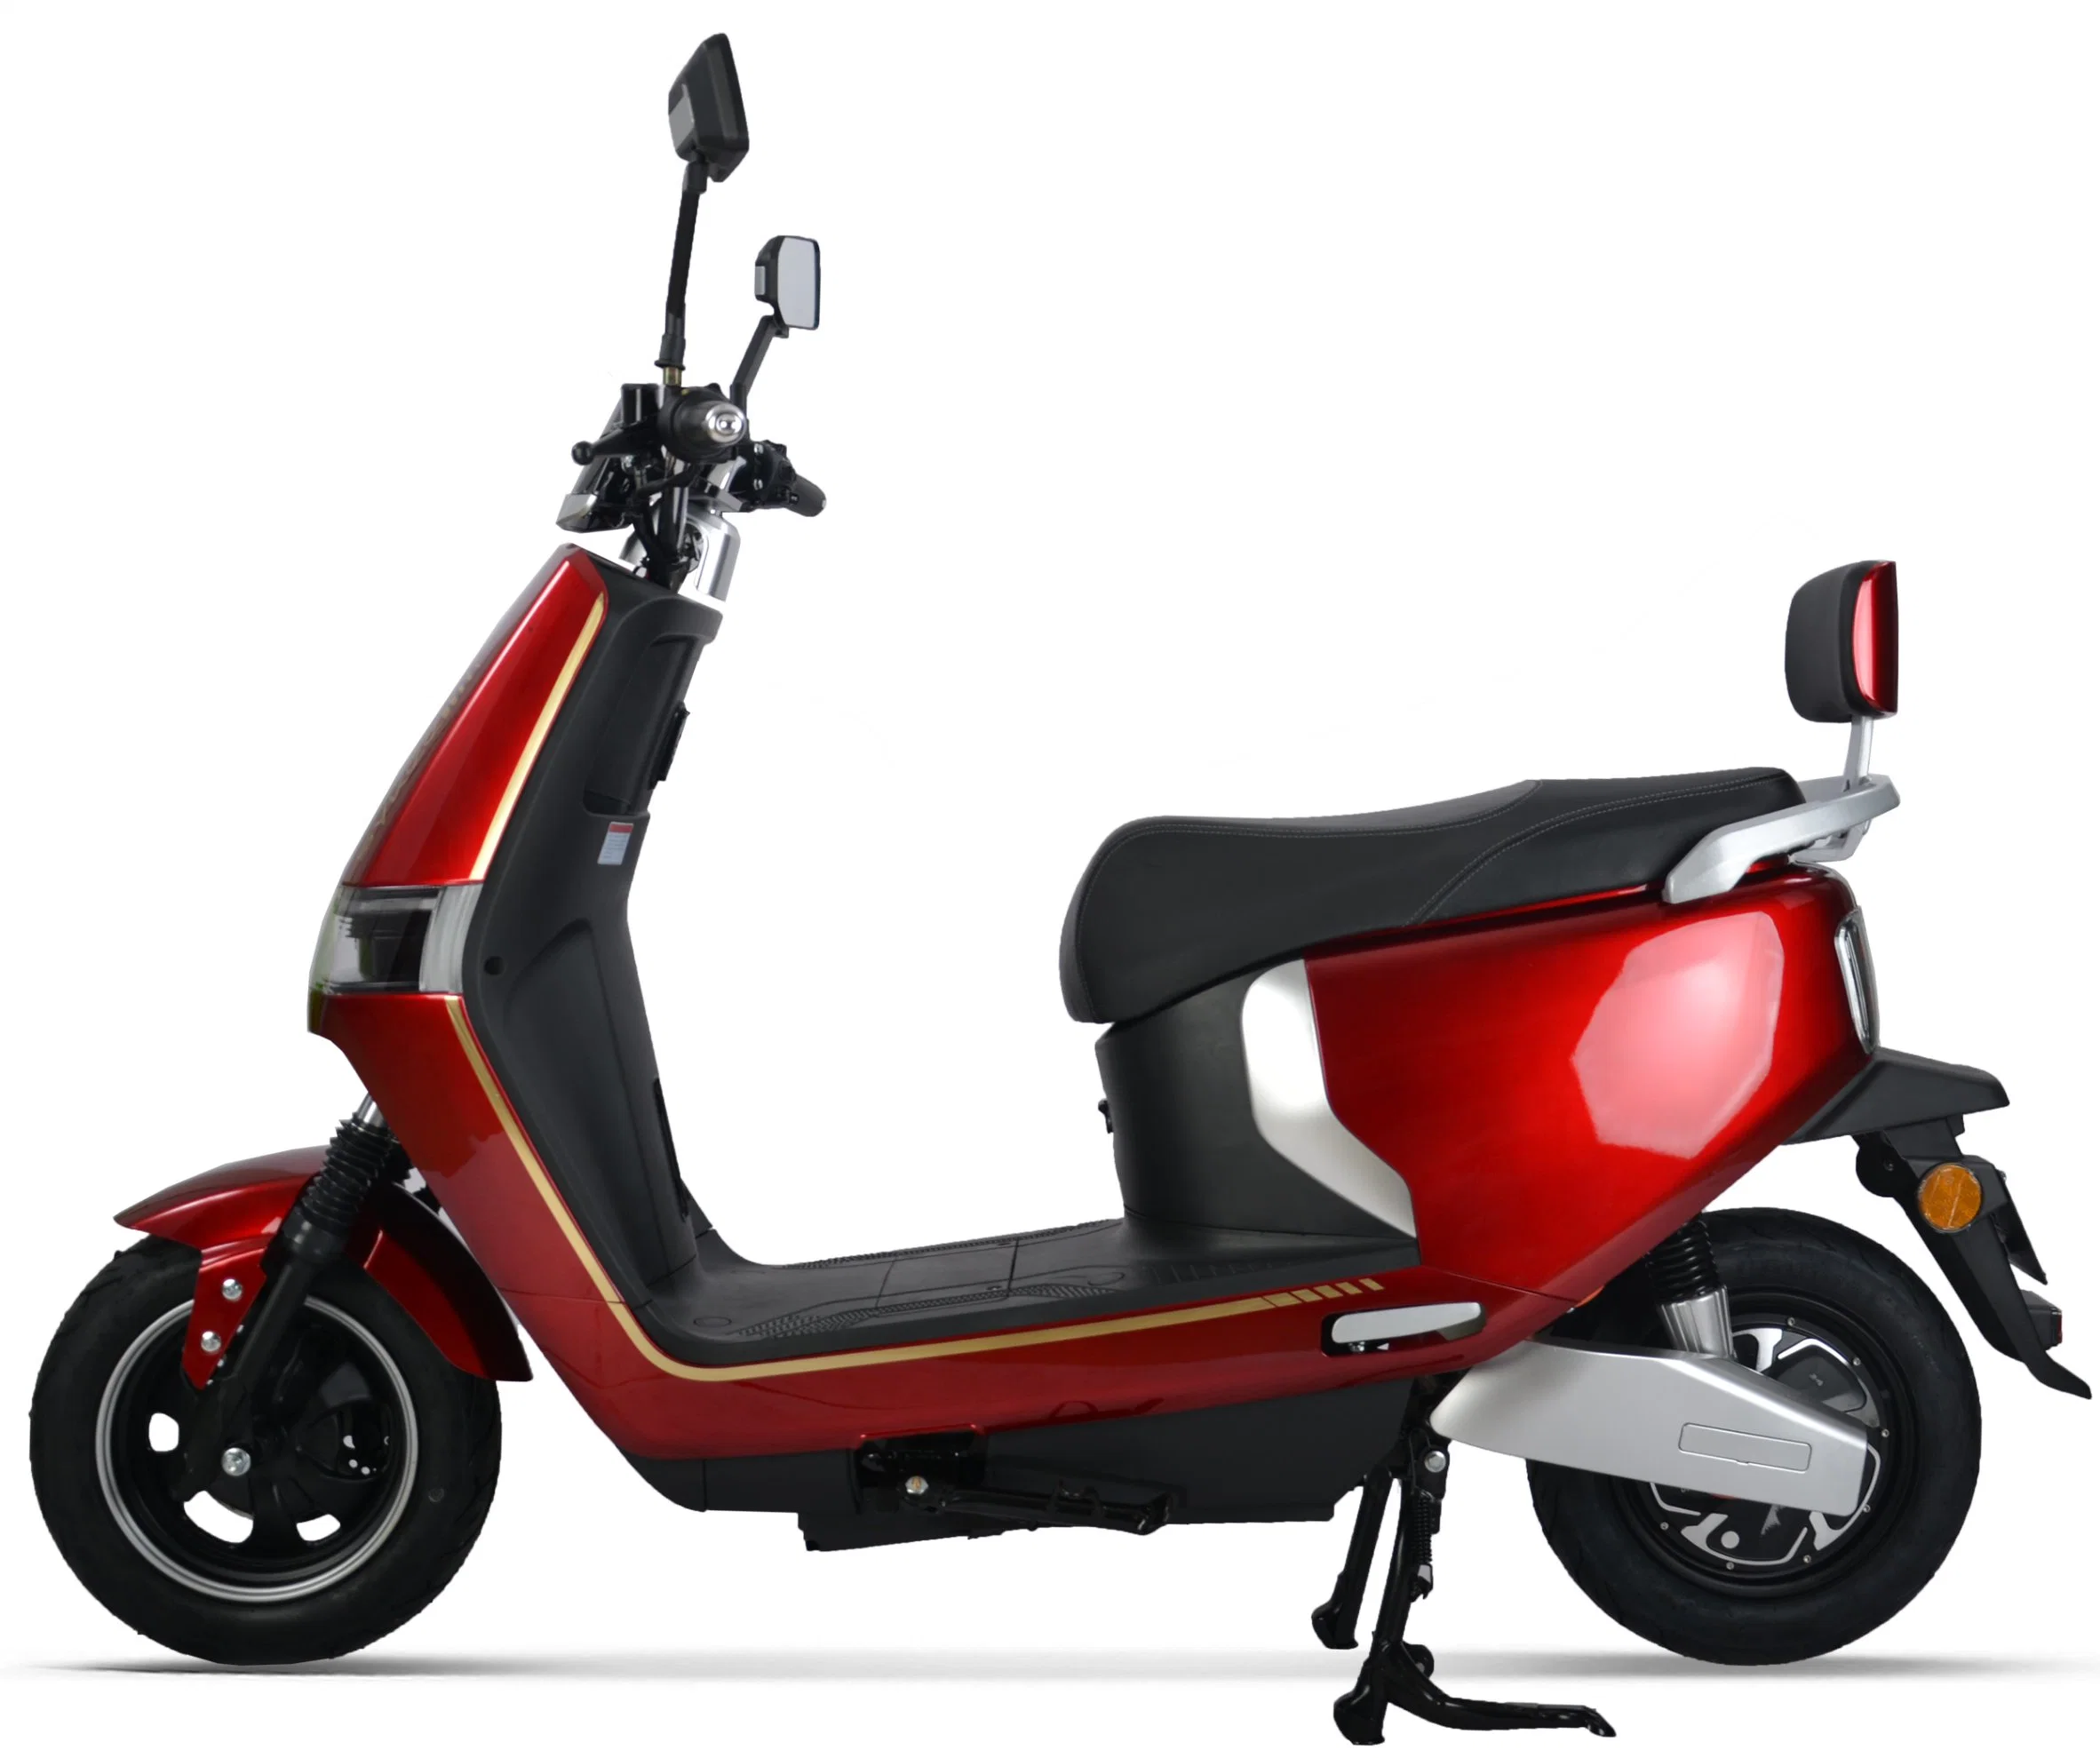 Two Wheel Electric Scooter Fat Tire Electric Bicycle Adult Bike Adult Mobility 800W 60V 32ah Lead Acid Battery E Scooter Electric Moped Electric Vehicle